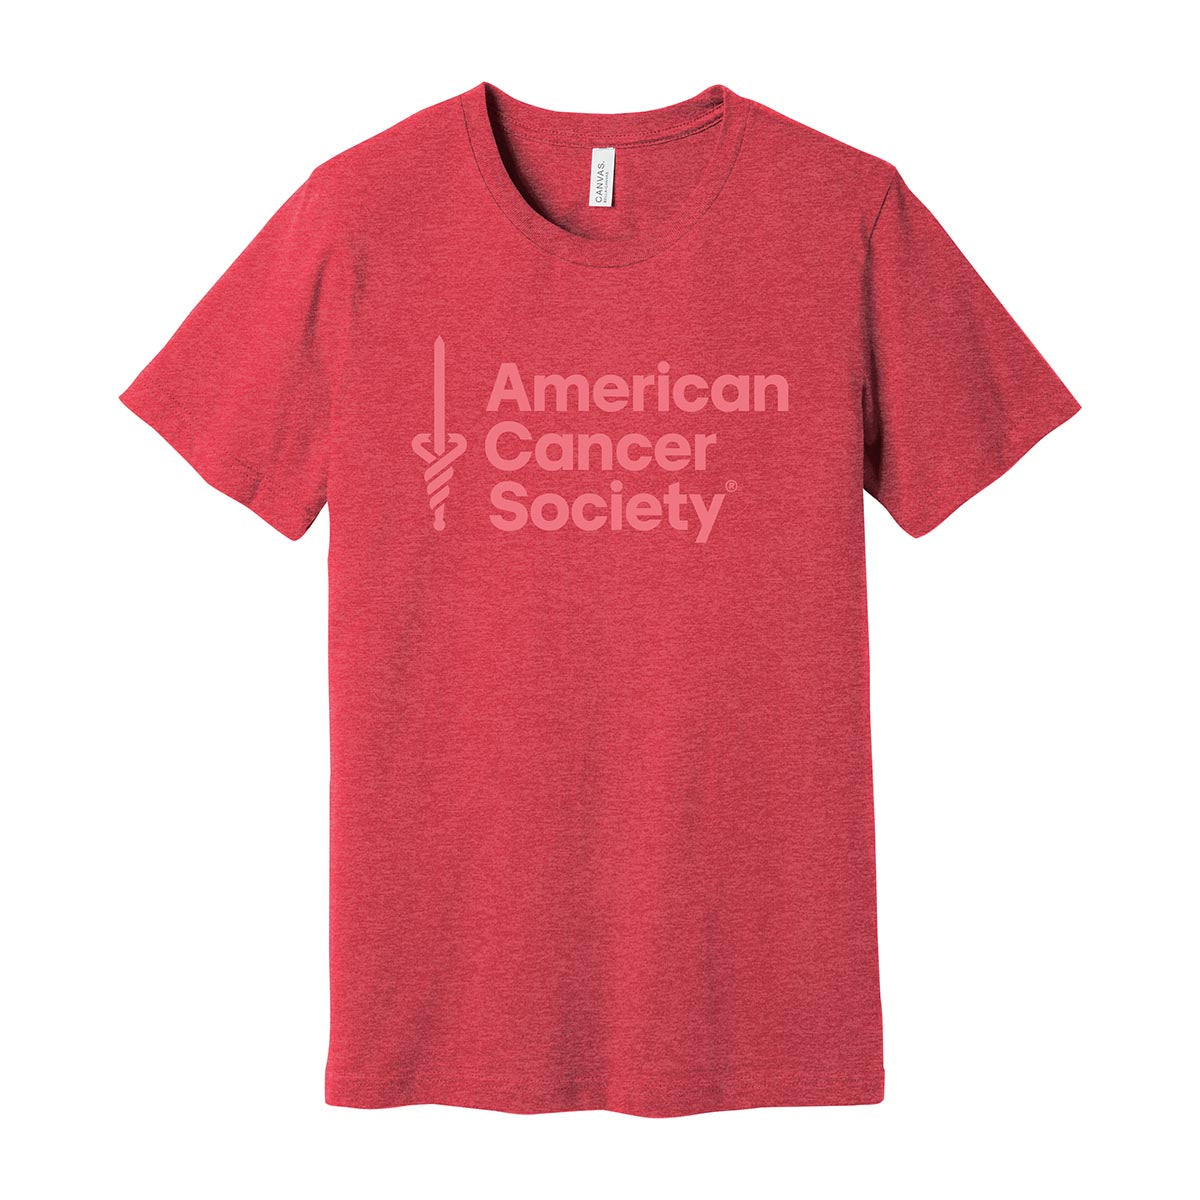 American Cancer Society Bella Canvas Tee - Heather Red